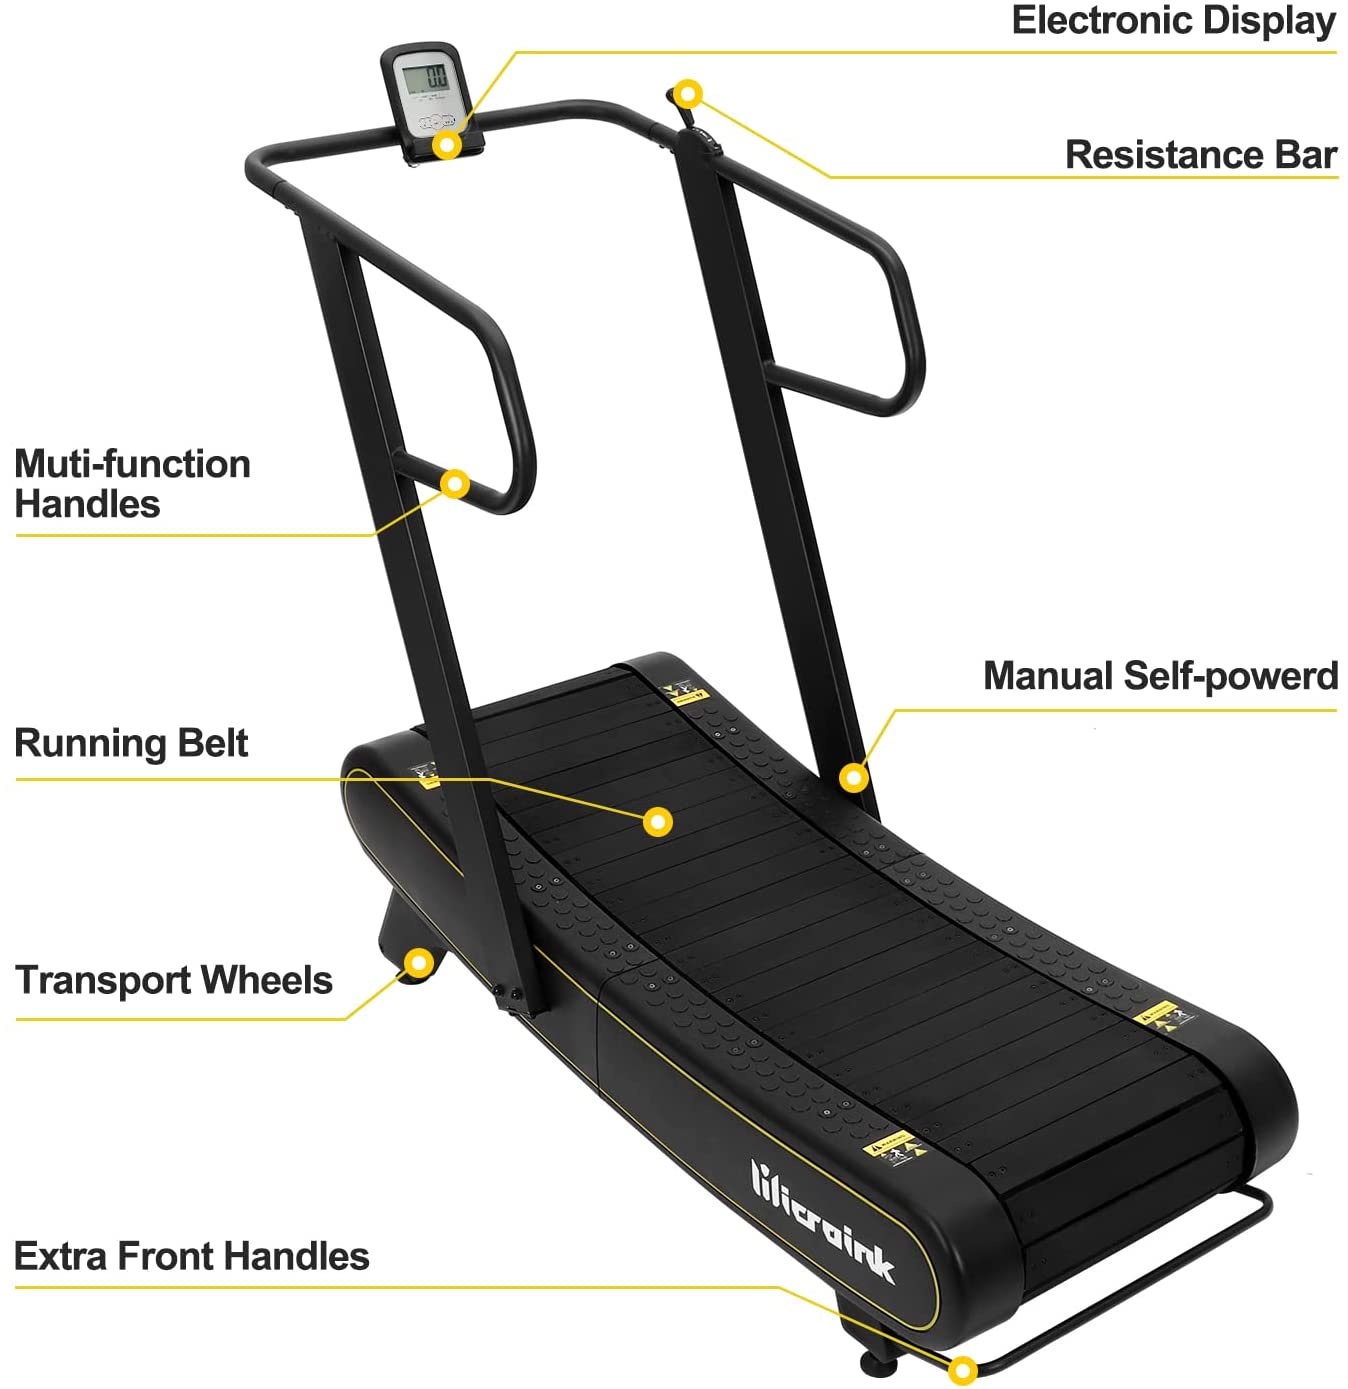 Microink curved manual treadmill spec